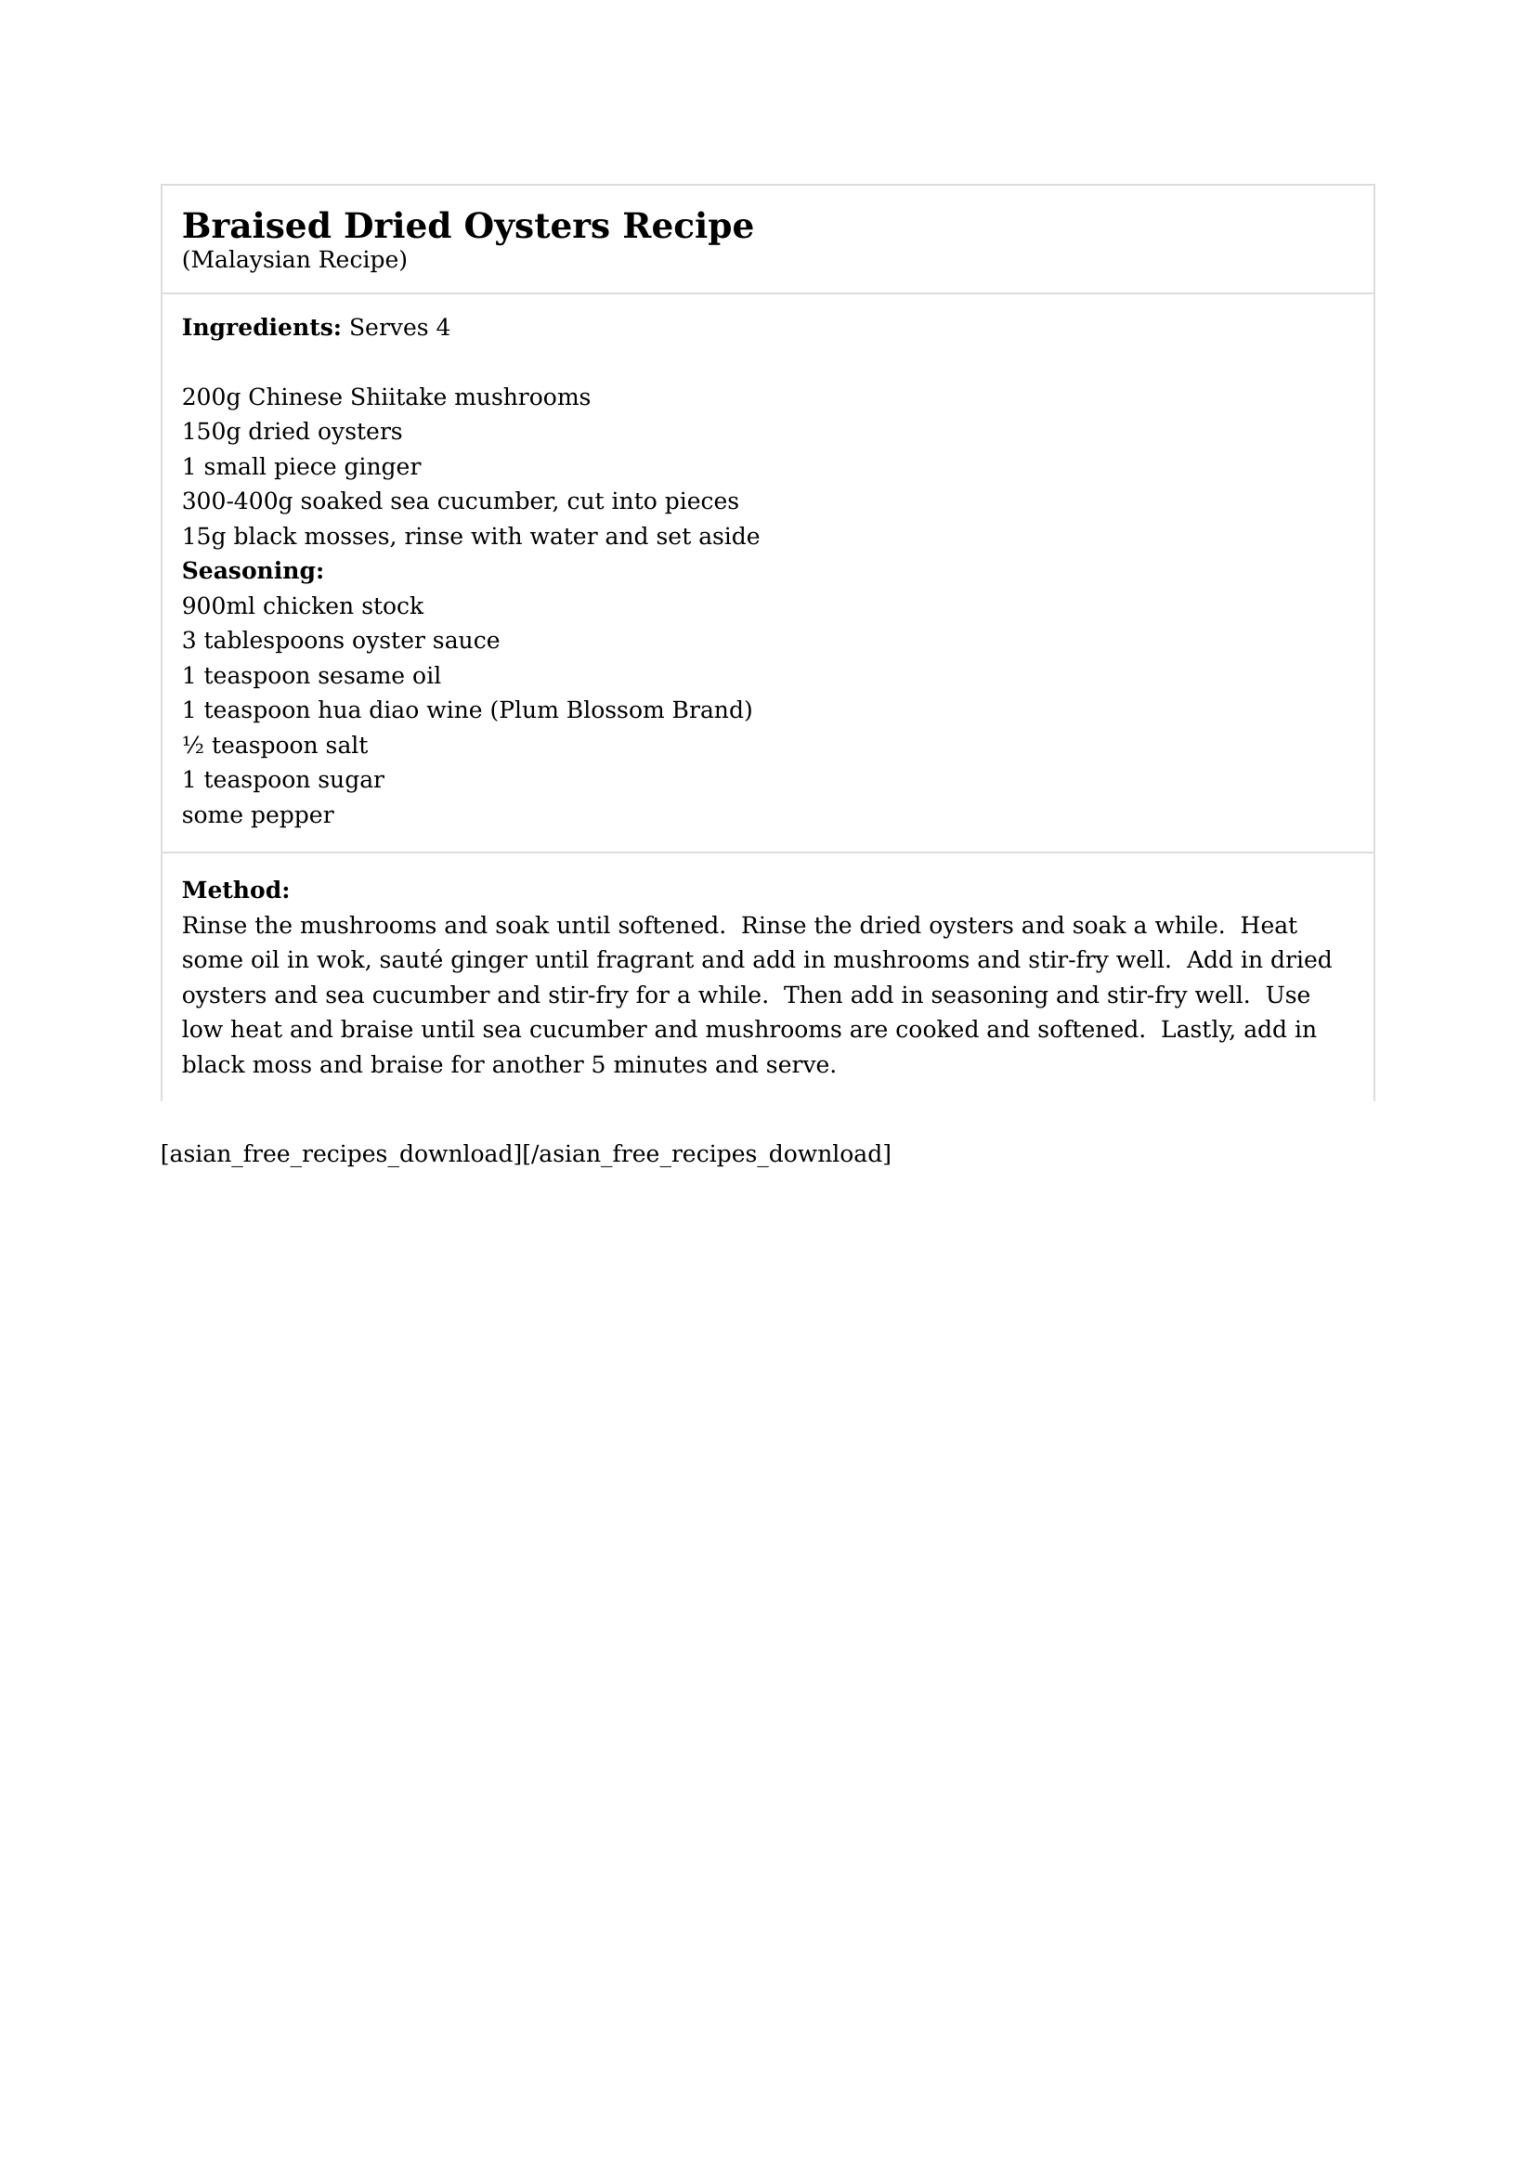 Braised Dried Oysters Recipe